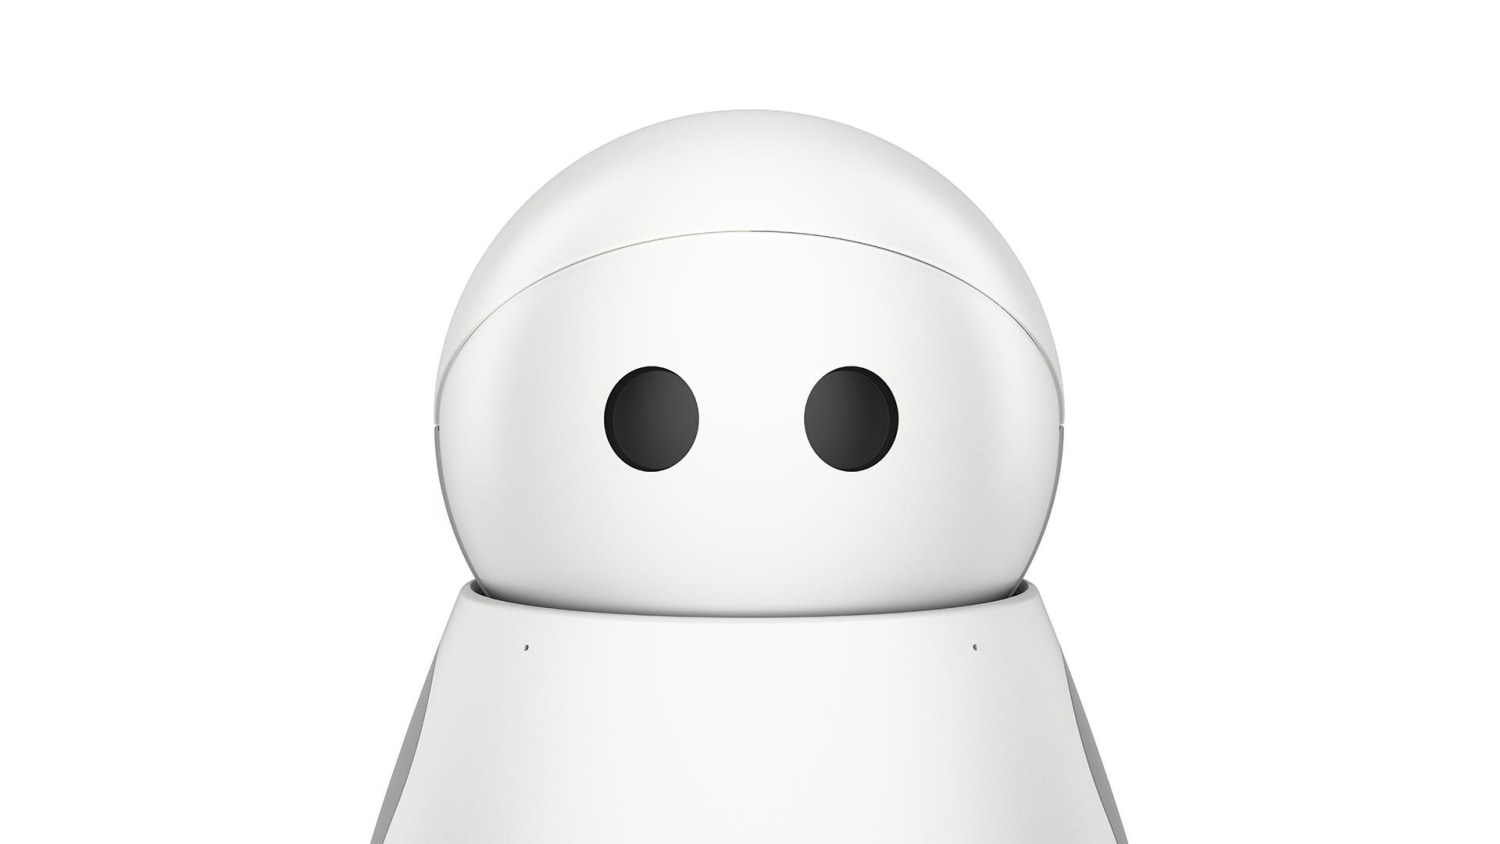 This robot will look after your kids so you don't have to